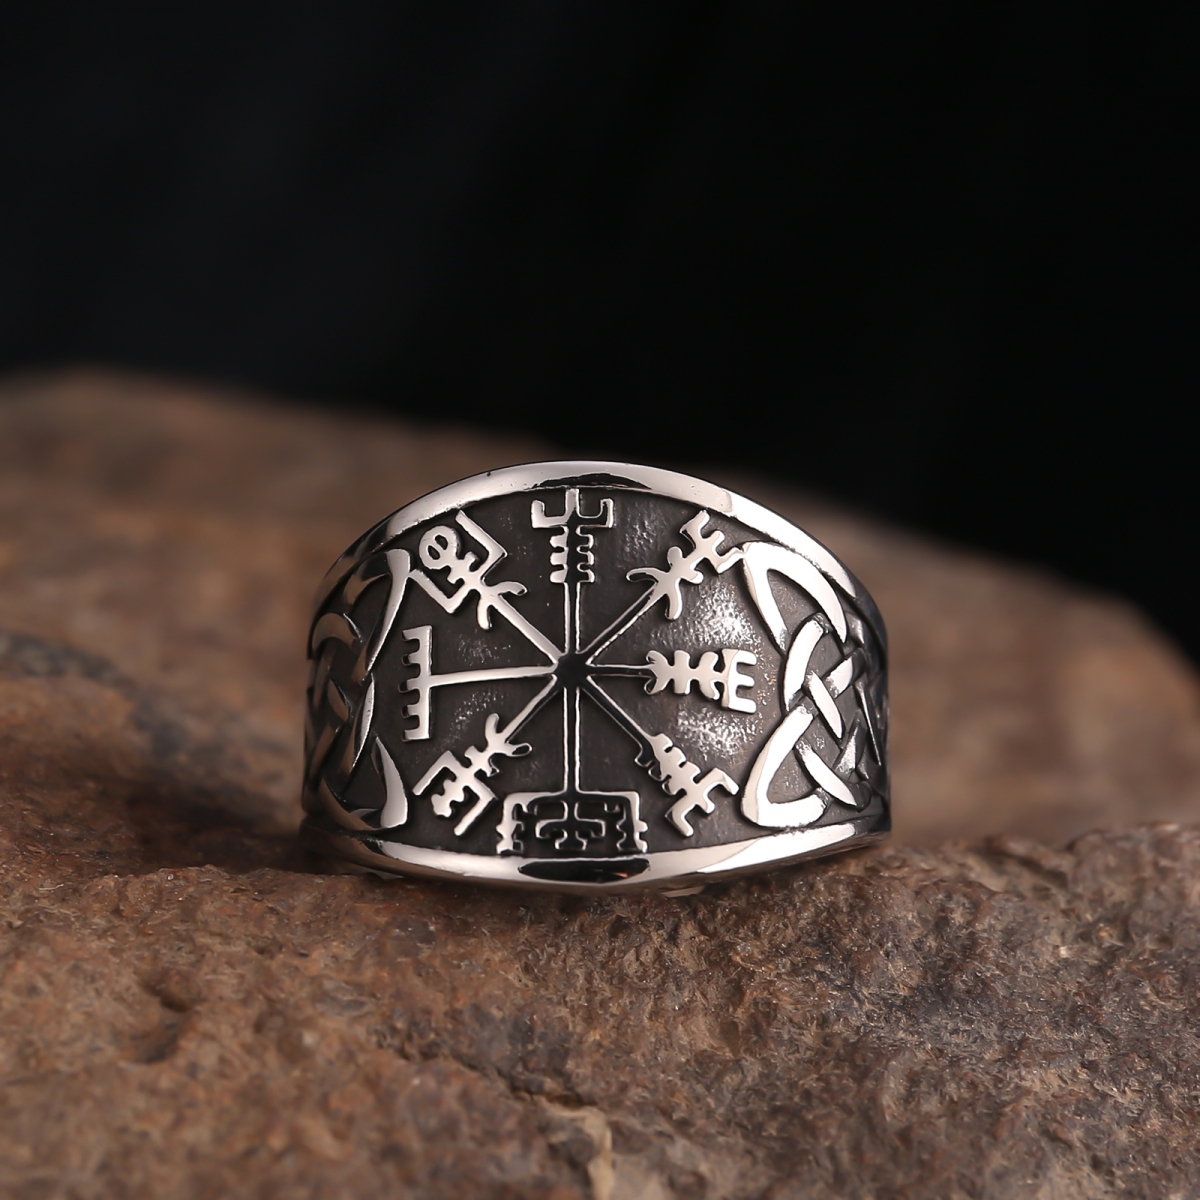 Viking jewelry women rings-NORSECOLLECTION- Viking Jewelry,Viking Necklace,Viking Bracelet,Viking Rings,Viking Mugs,Viking Accessories,Viking Crafts